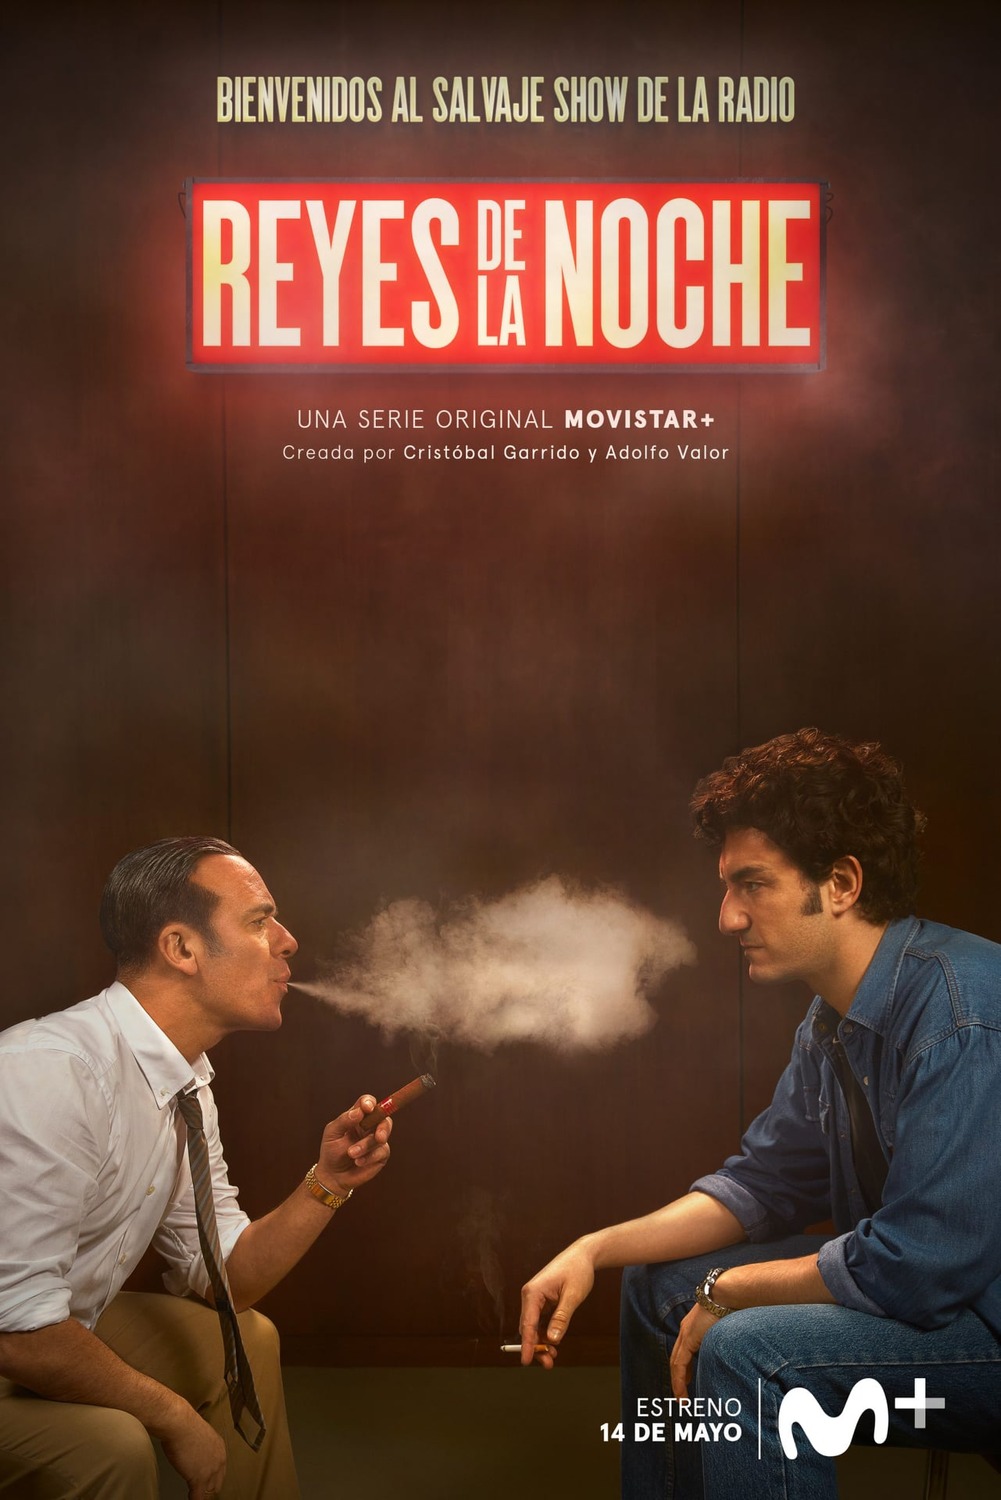 Extra Large TV Poster Image for Reyes de la noche (#2 of 3)